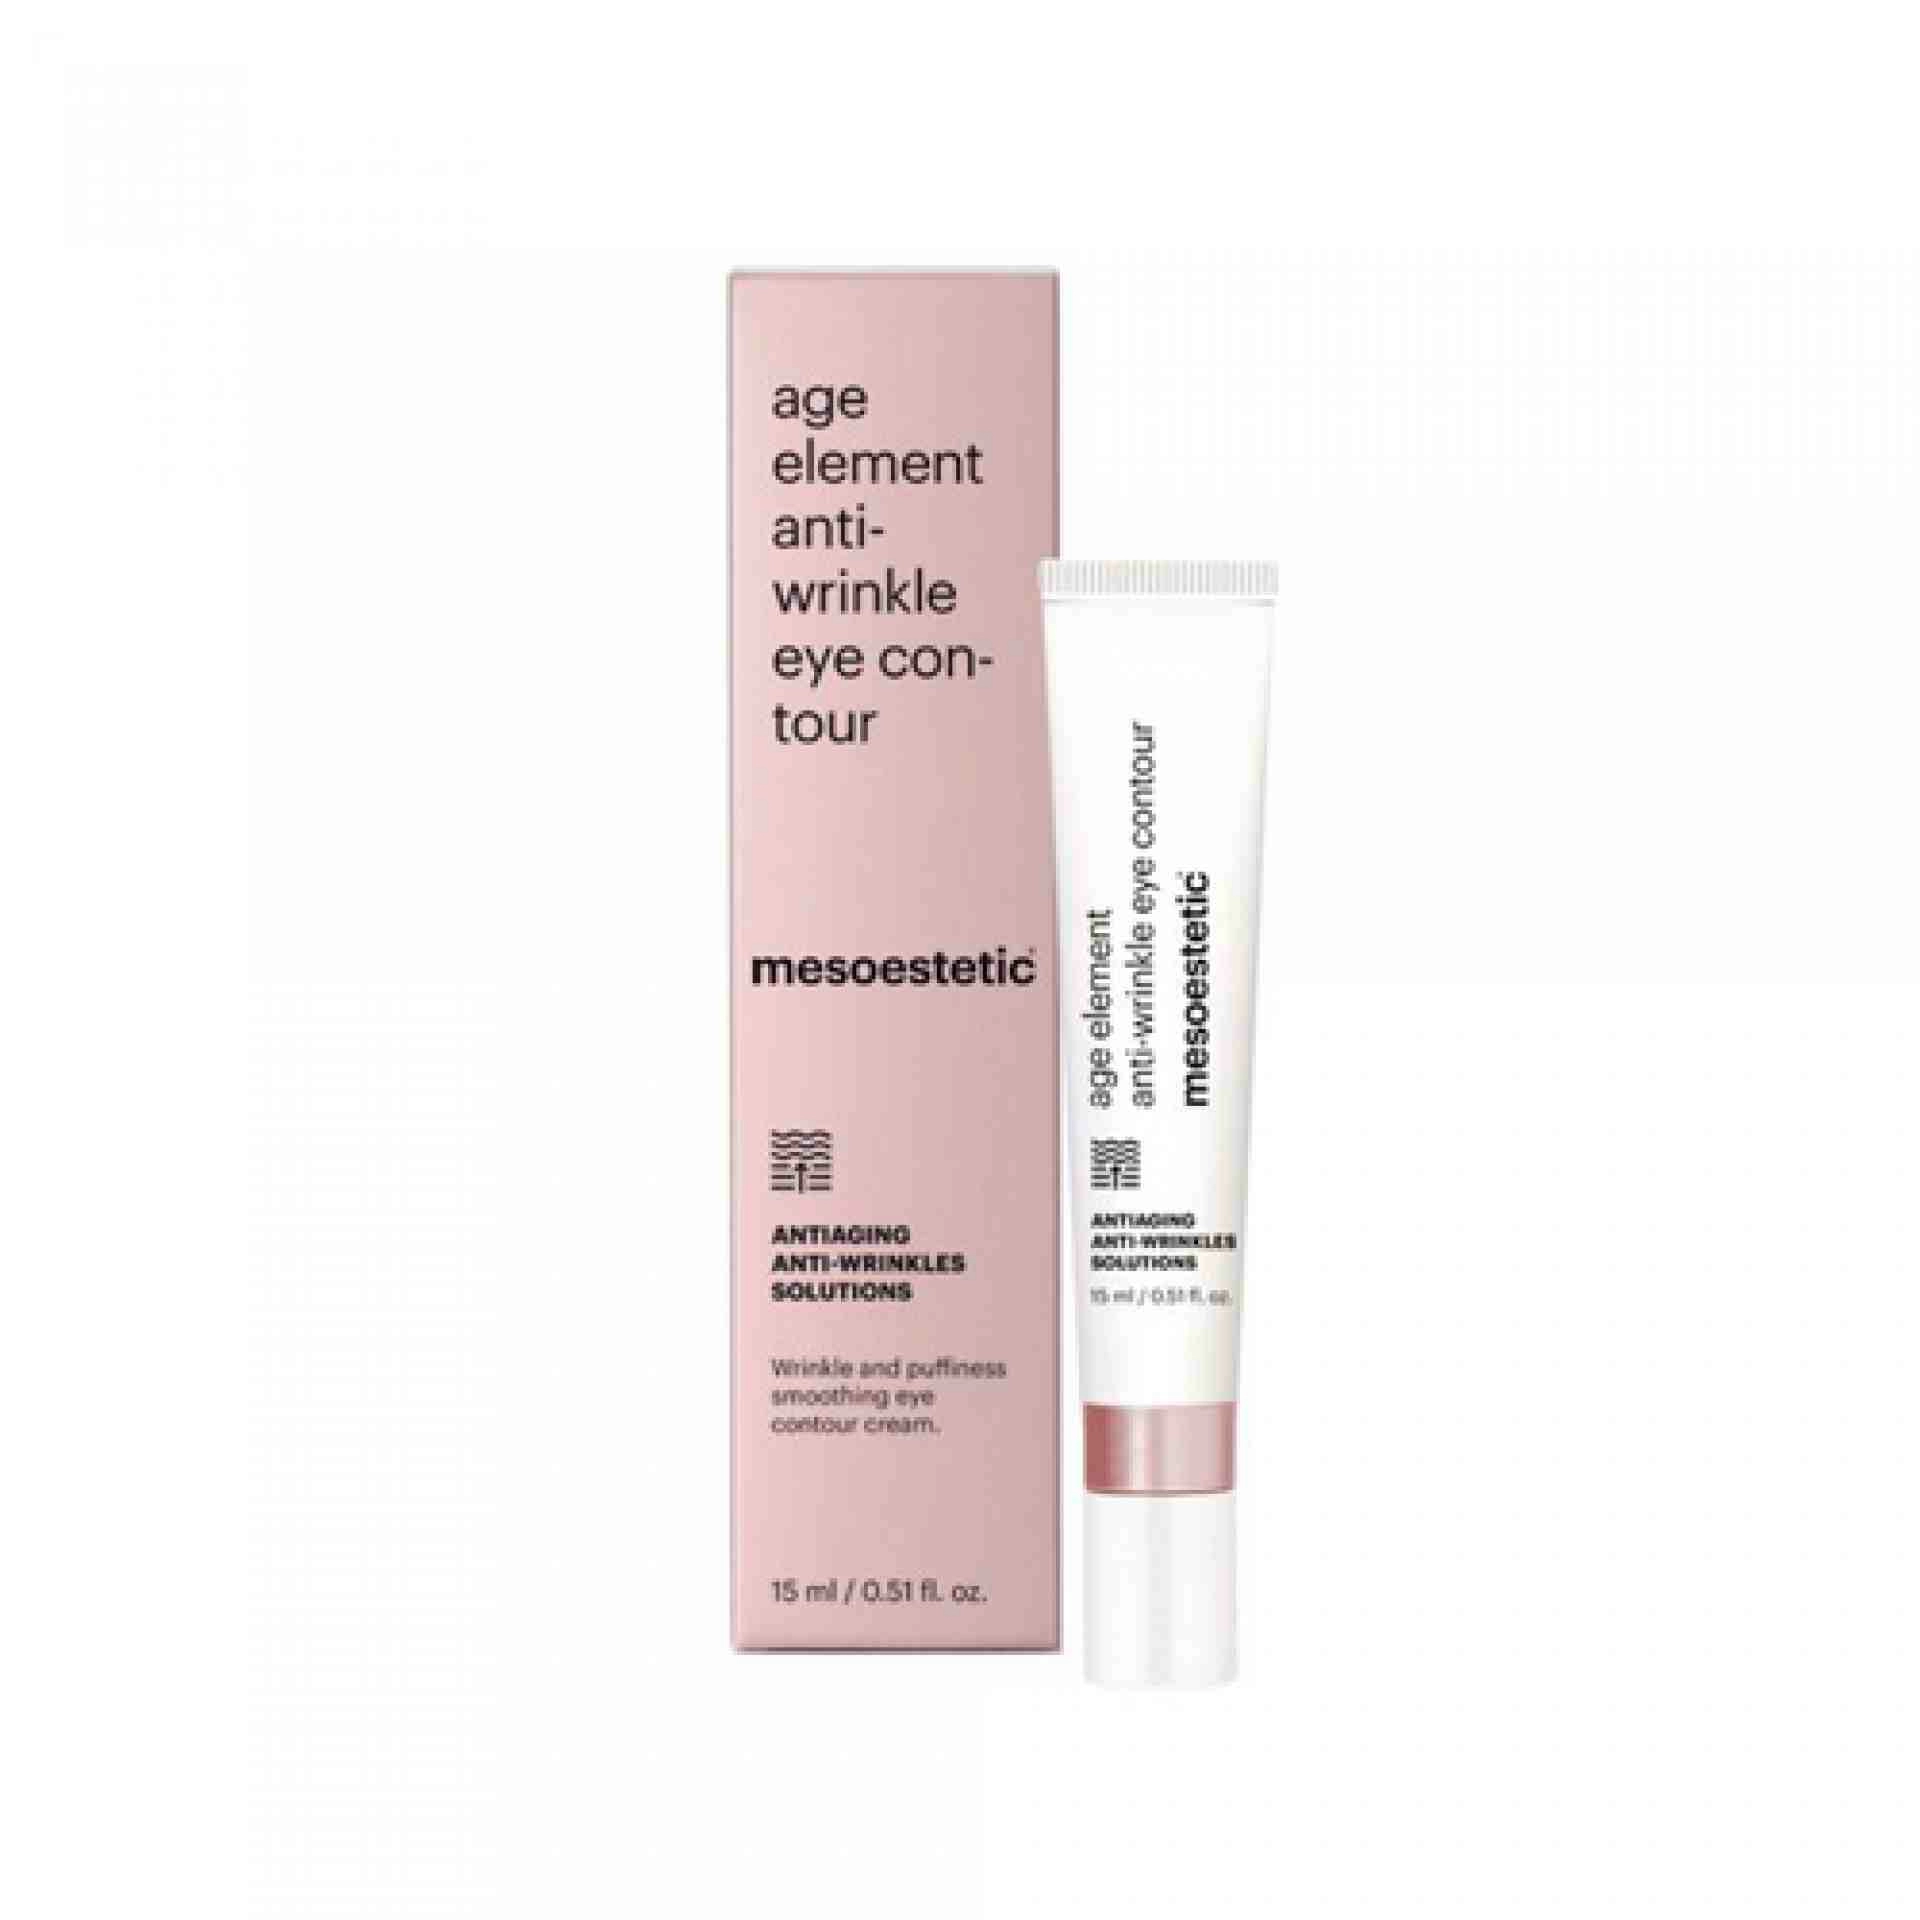 age element anti-wrinkle eye contour | contorno de ojos 15ml - antiaging antiwrinkles solutions - mesoestetic ®